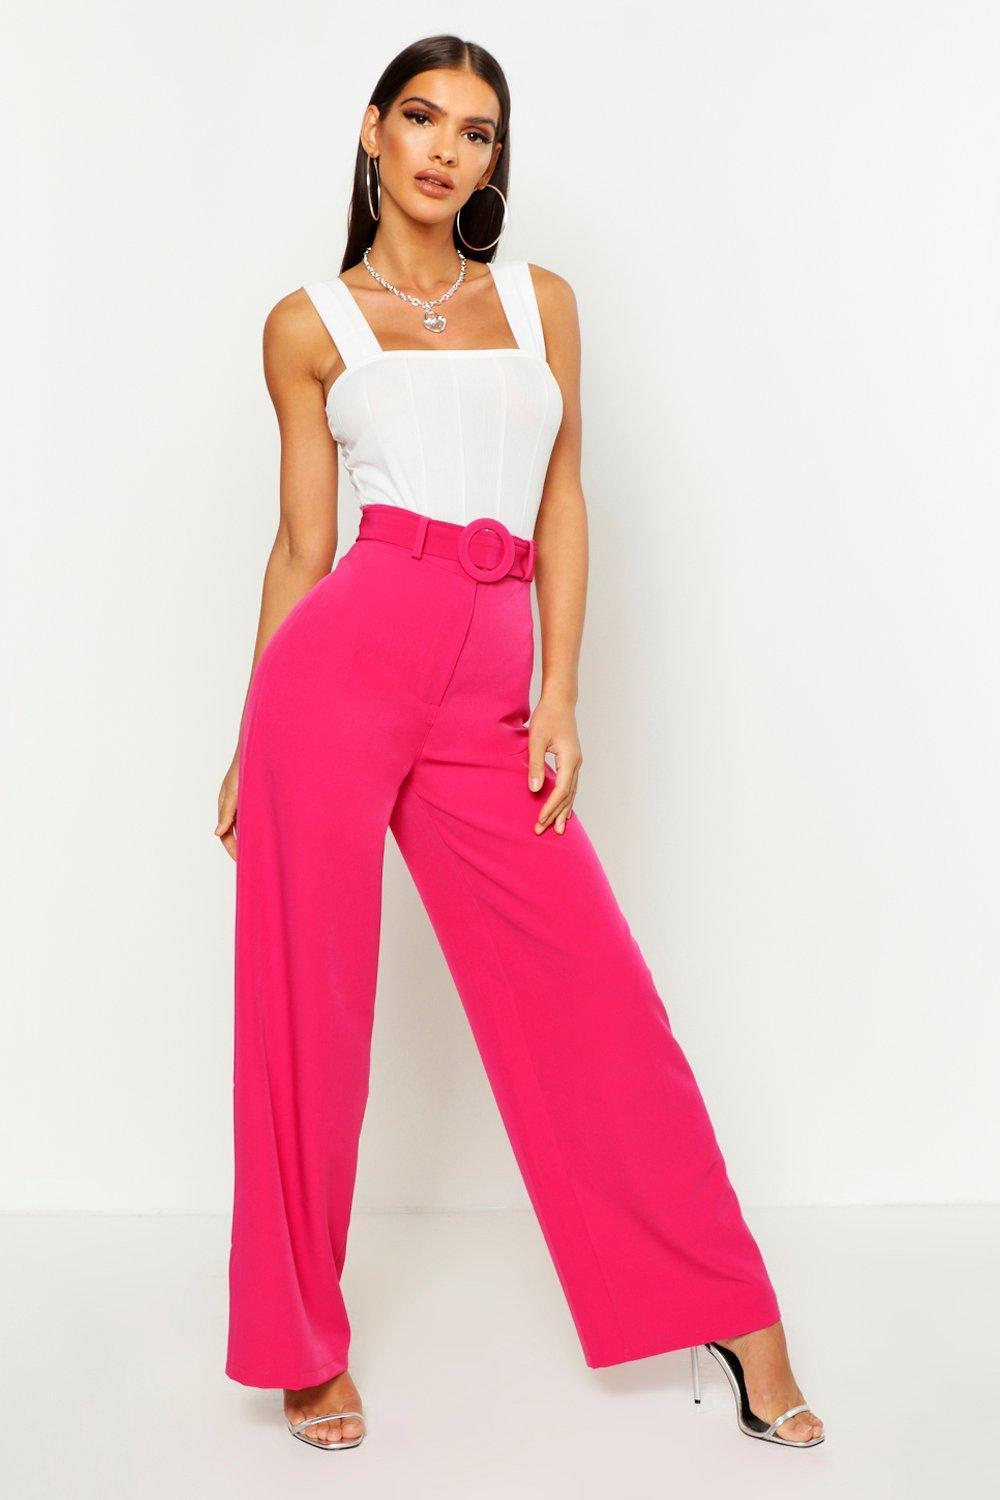 Boohoo Wide Leg Belted High Waist Pants in Pink - Lyst